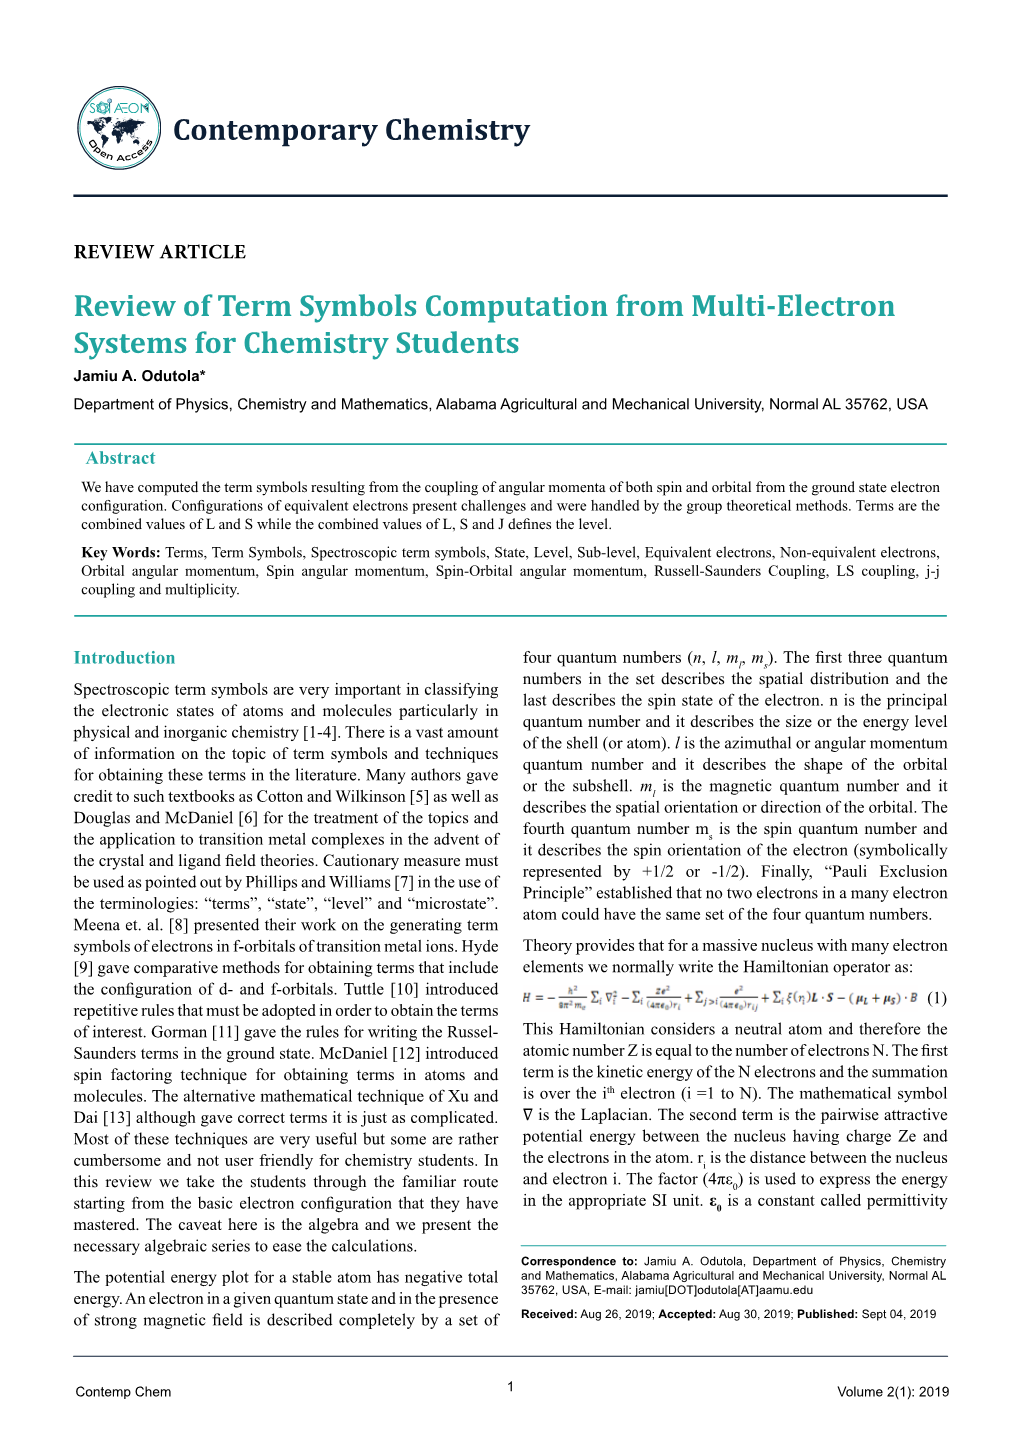 Review of Term Symbols Computation from Multi-Electron Systems for Chemistry Students Jamiu A